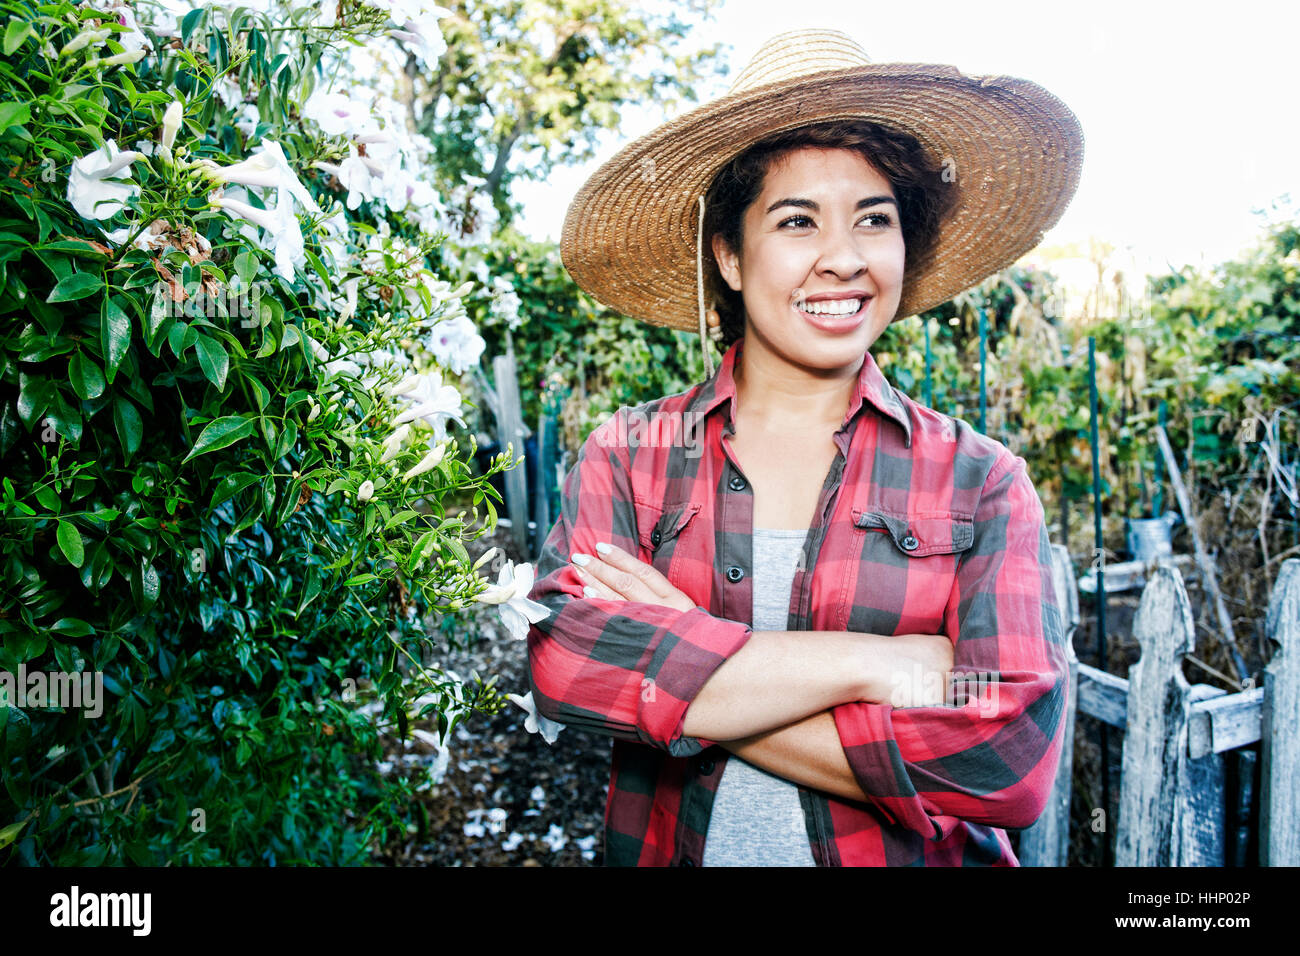 Smiling Mixed Race woman standing in garden Stock Photo